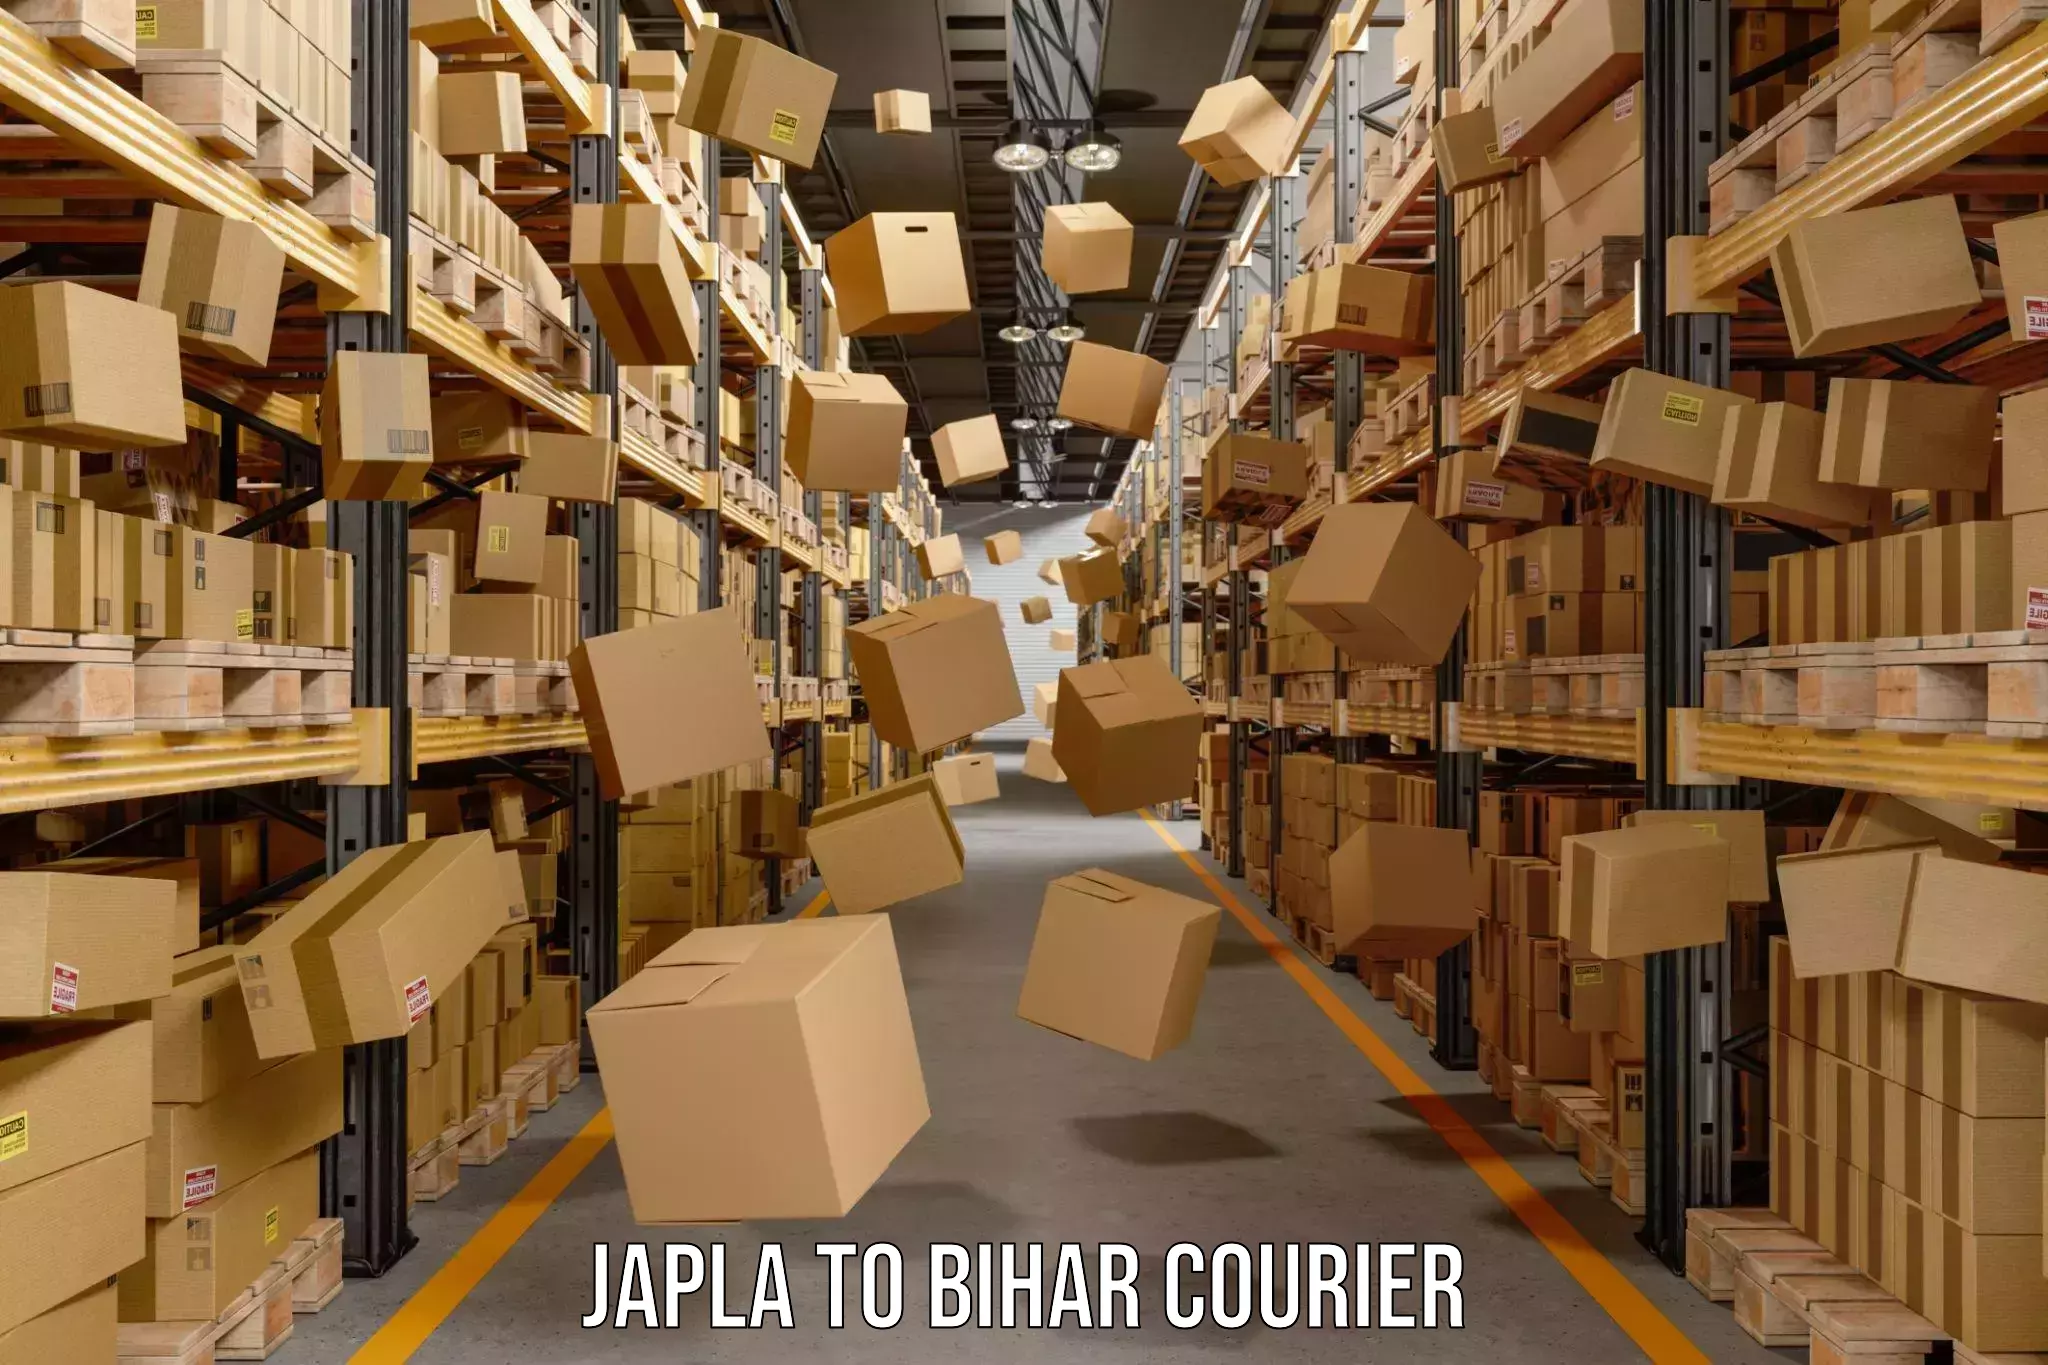 Business delivery service Japla to Dhaka